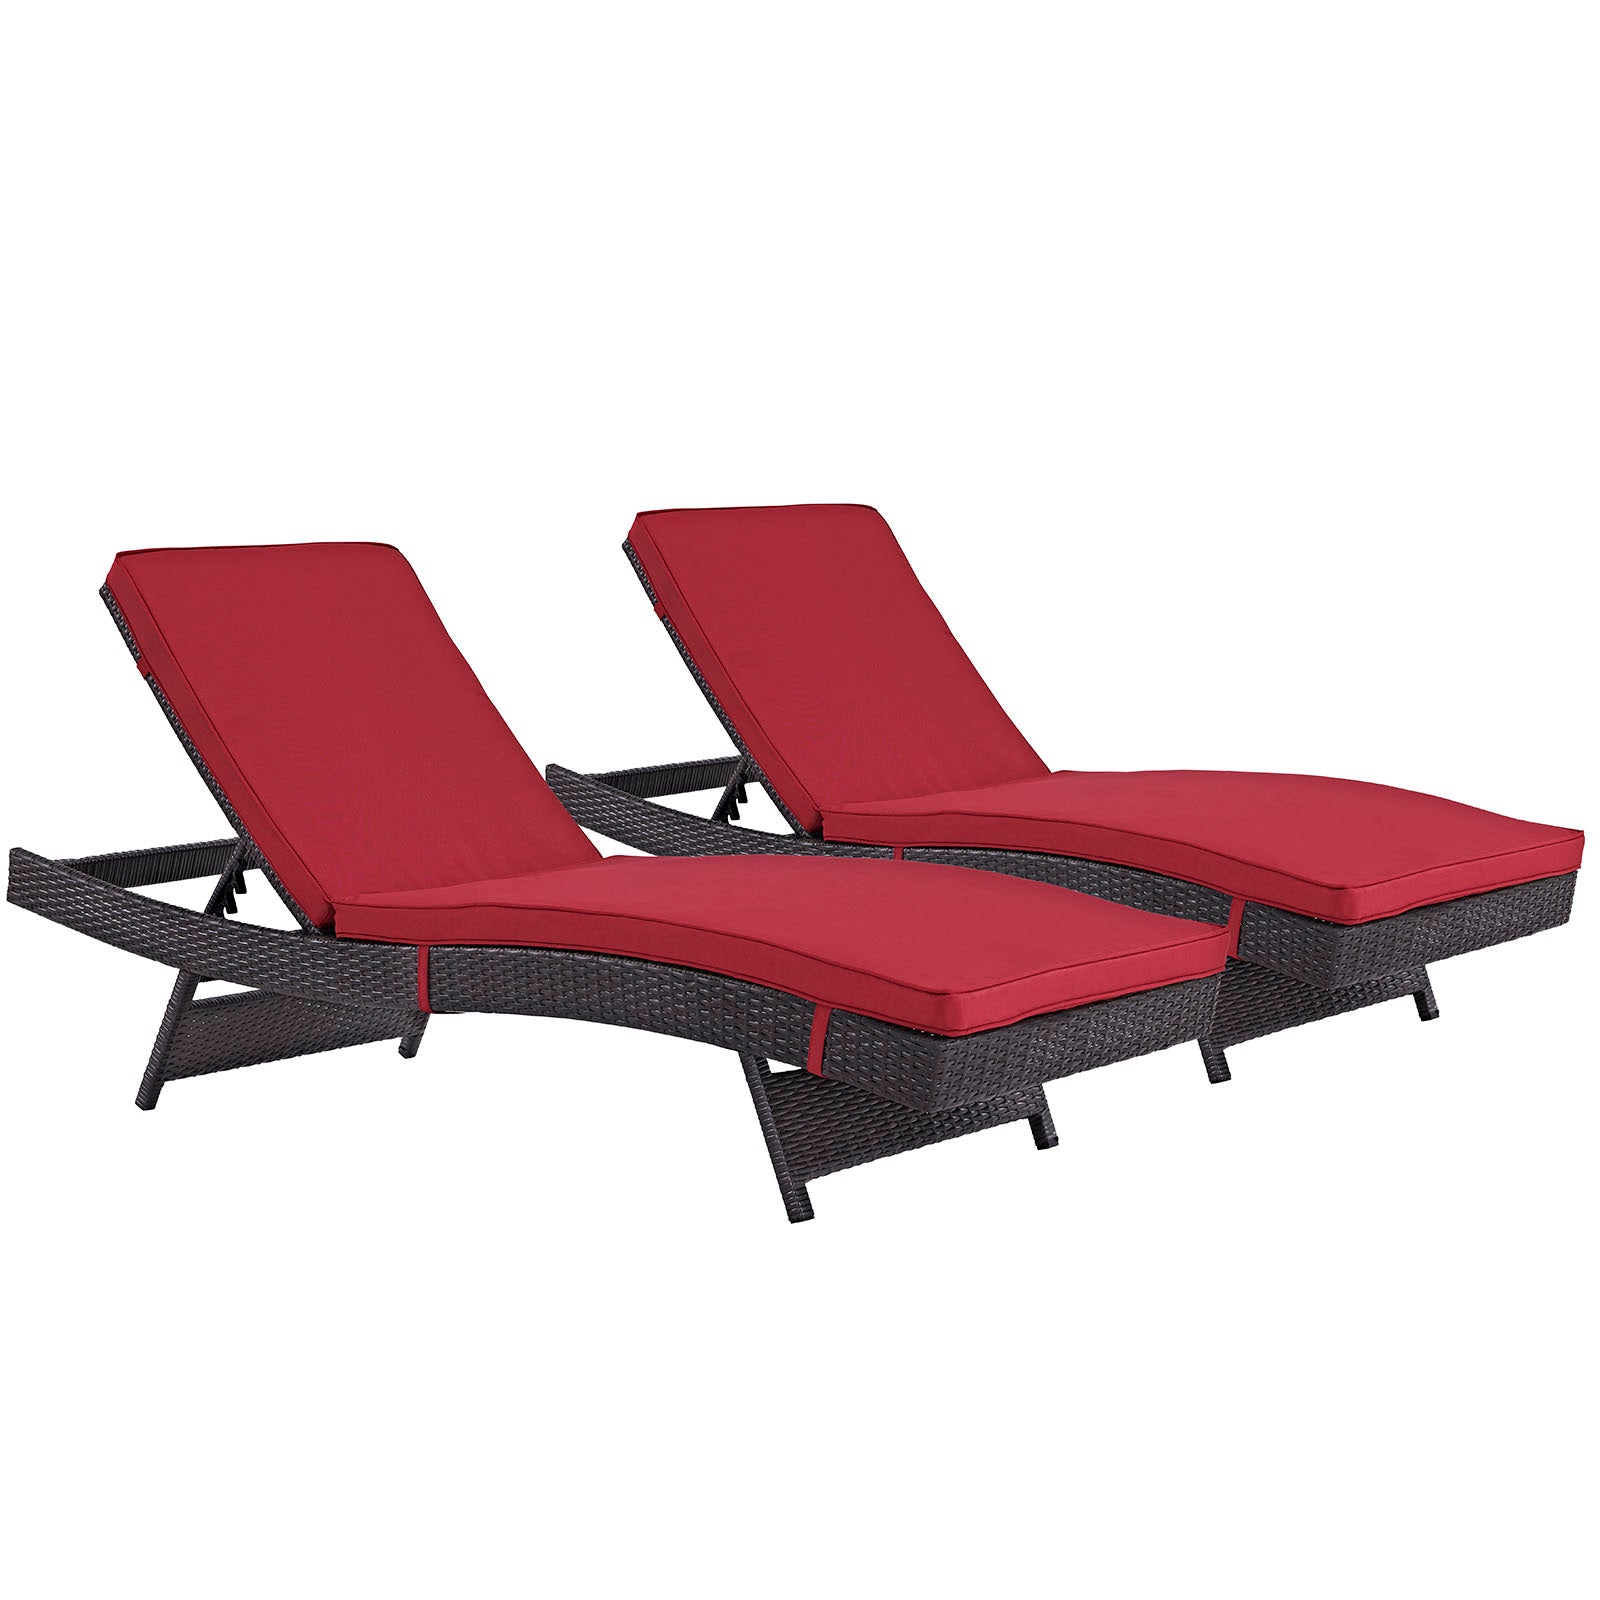 Convene Chaise Outdoor Patio Set of 2 - East Shore Modern Home Furnishings